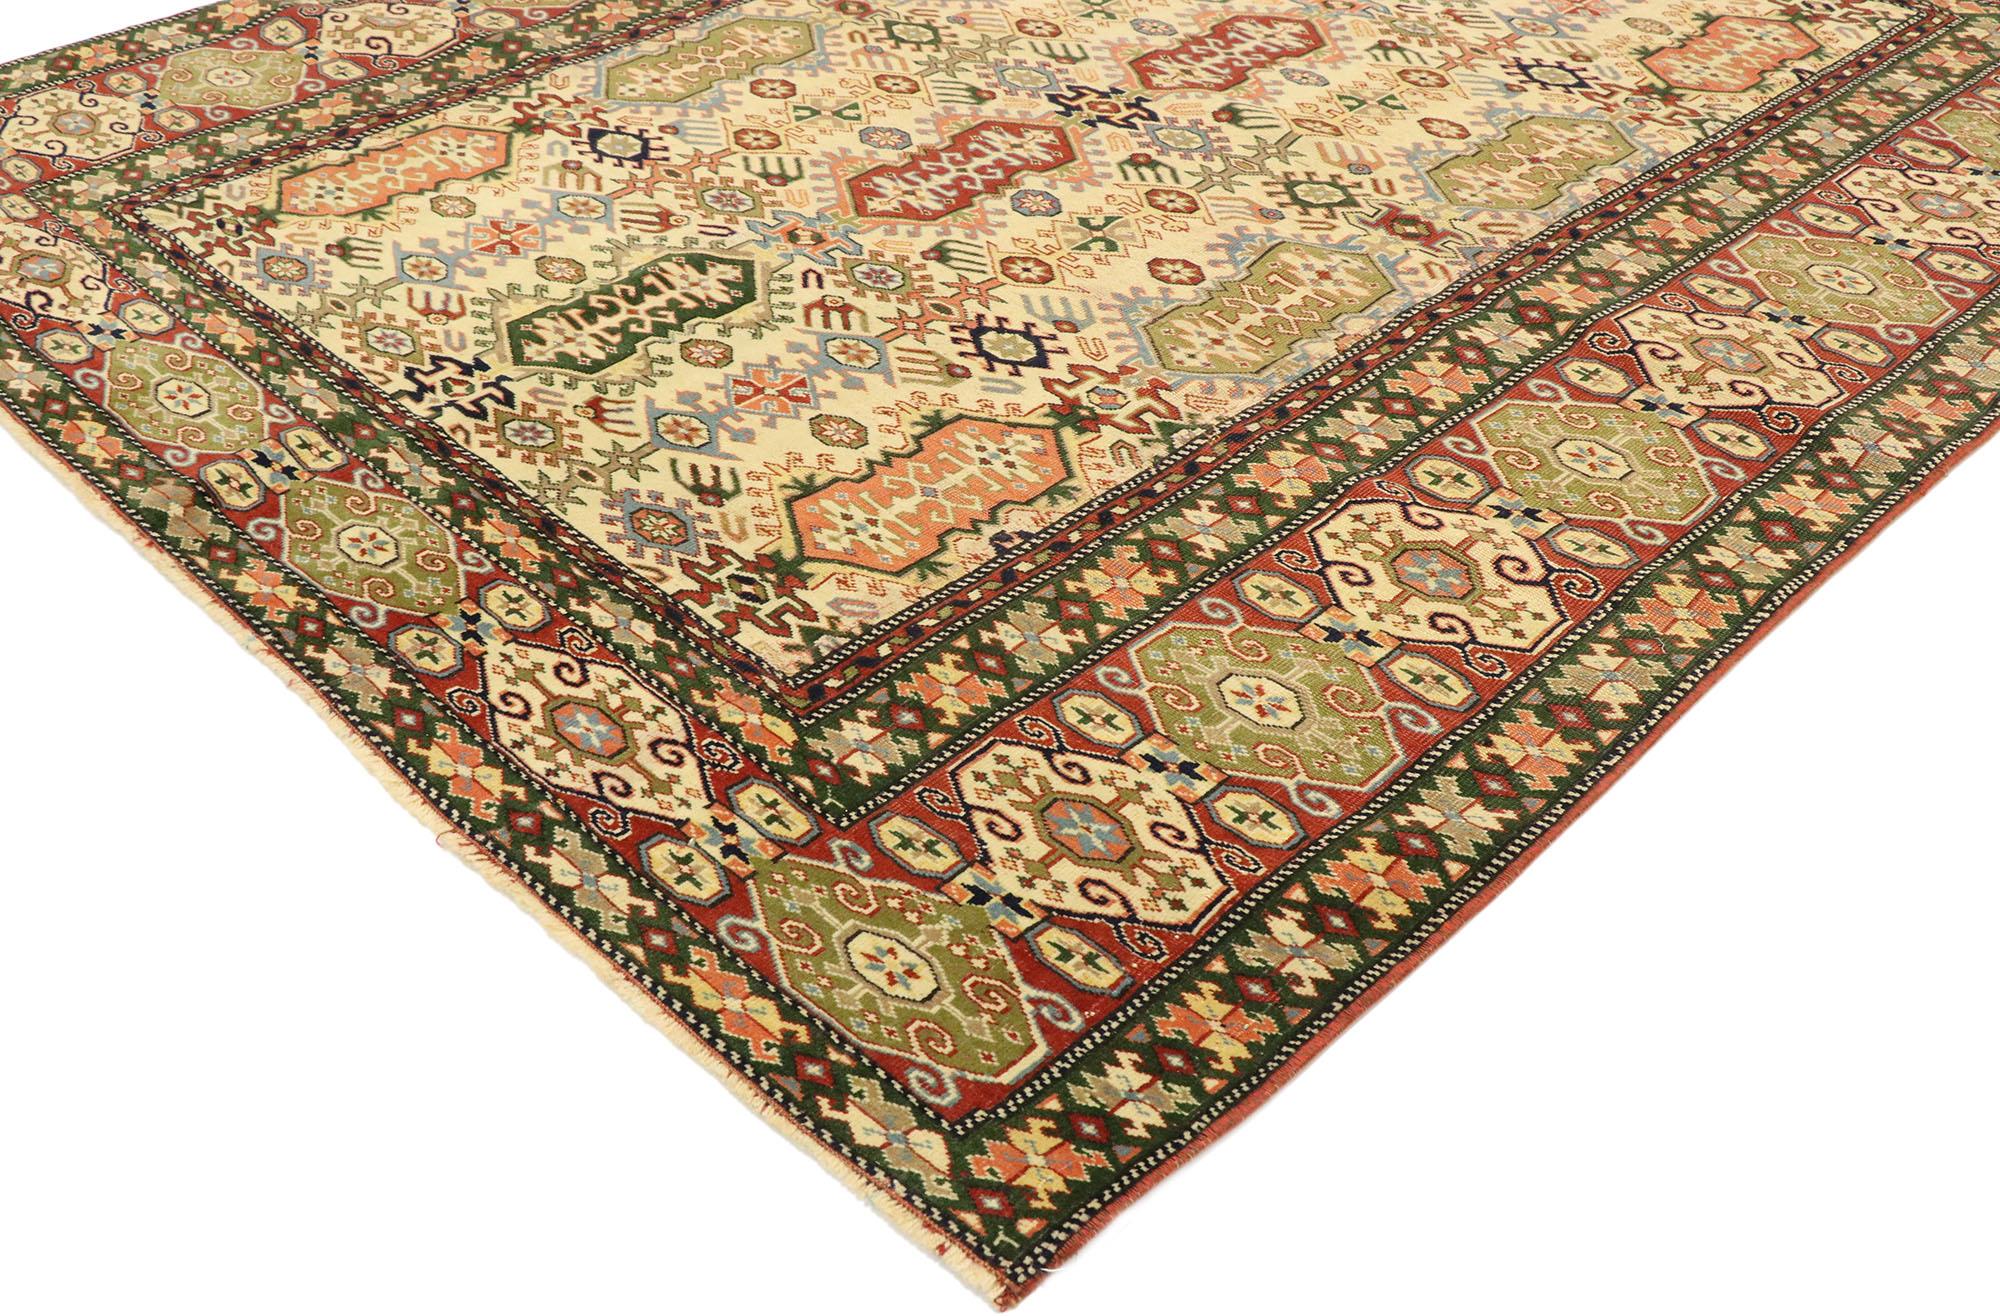 53070, vintage Turkish Oushak rug with modern Tribal style. Displaying well-balanced symmetry and a tribal design aesthetic, this hand knotted wool distressed vintage Turkish Oushak rug charms with ease. The abrashed beige field features an all-over